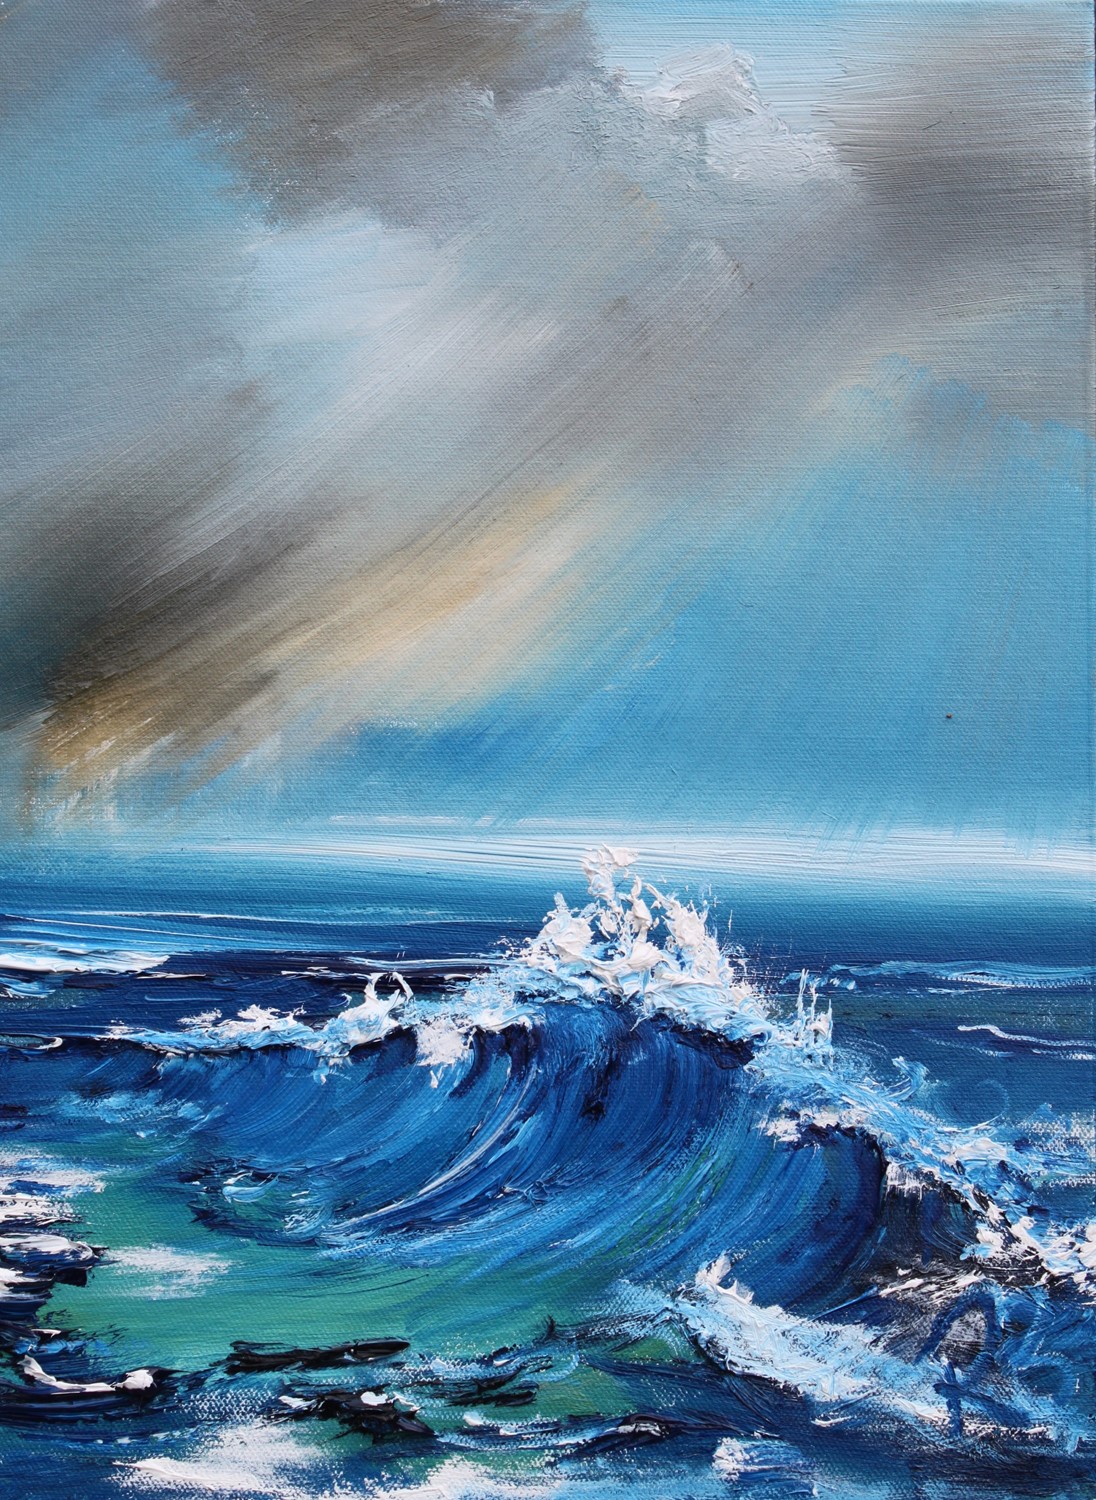 'Racing Waves' by artist Rosanne Barr